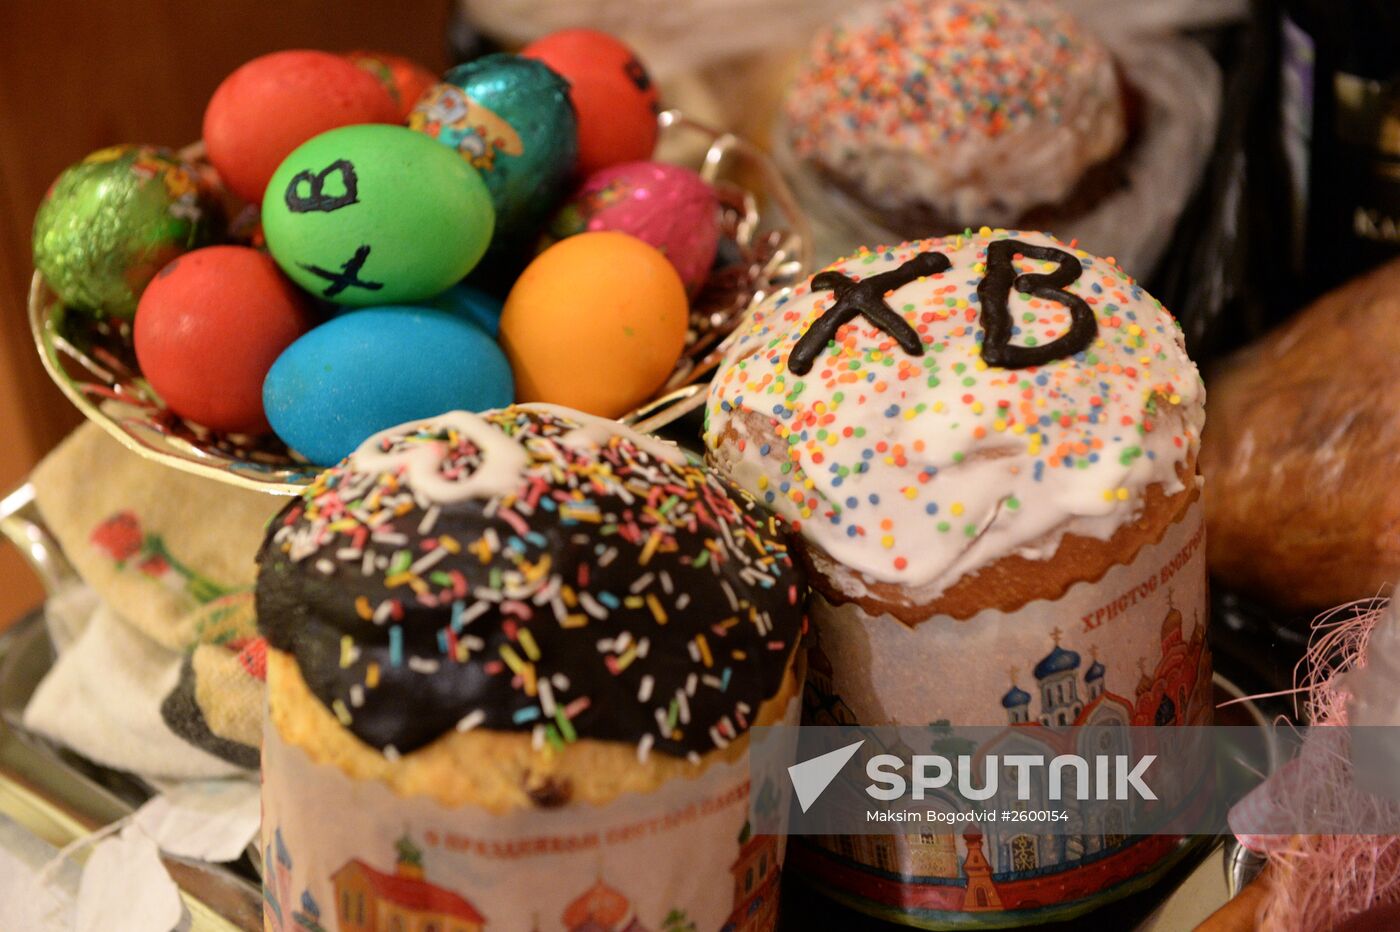 Celebrating Catholic Easter in Russian regions